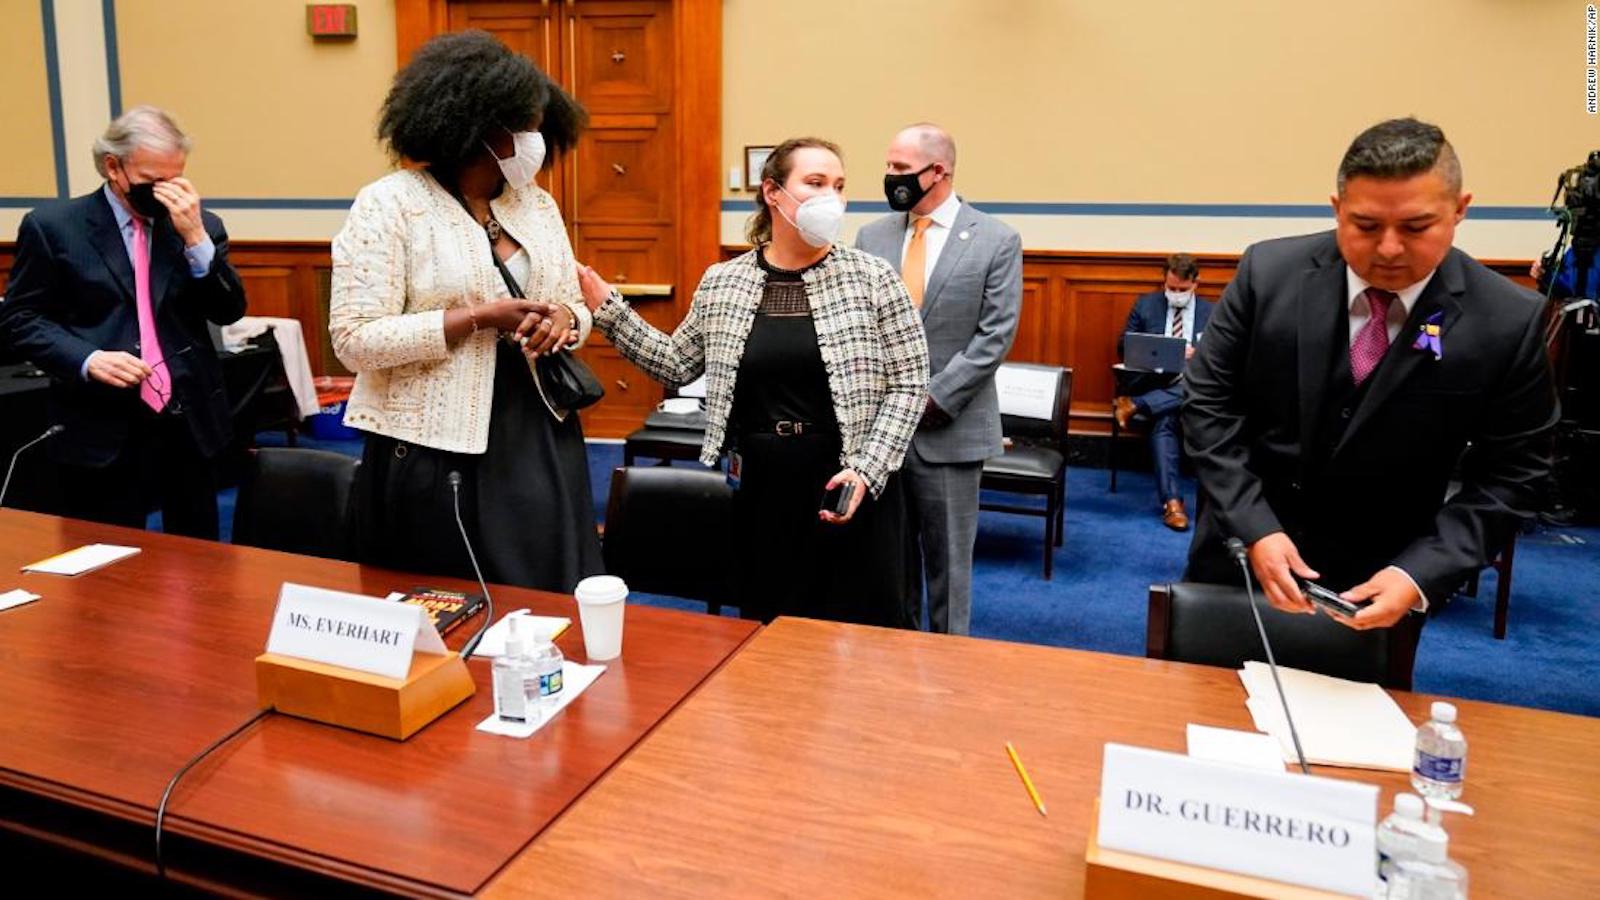 Key moments from the emotional hearing on gun violence in the US Congress.